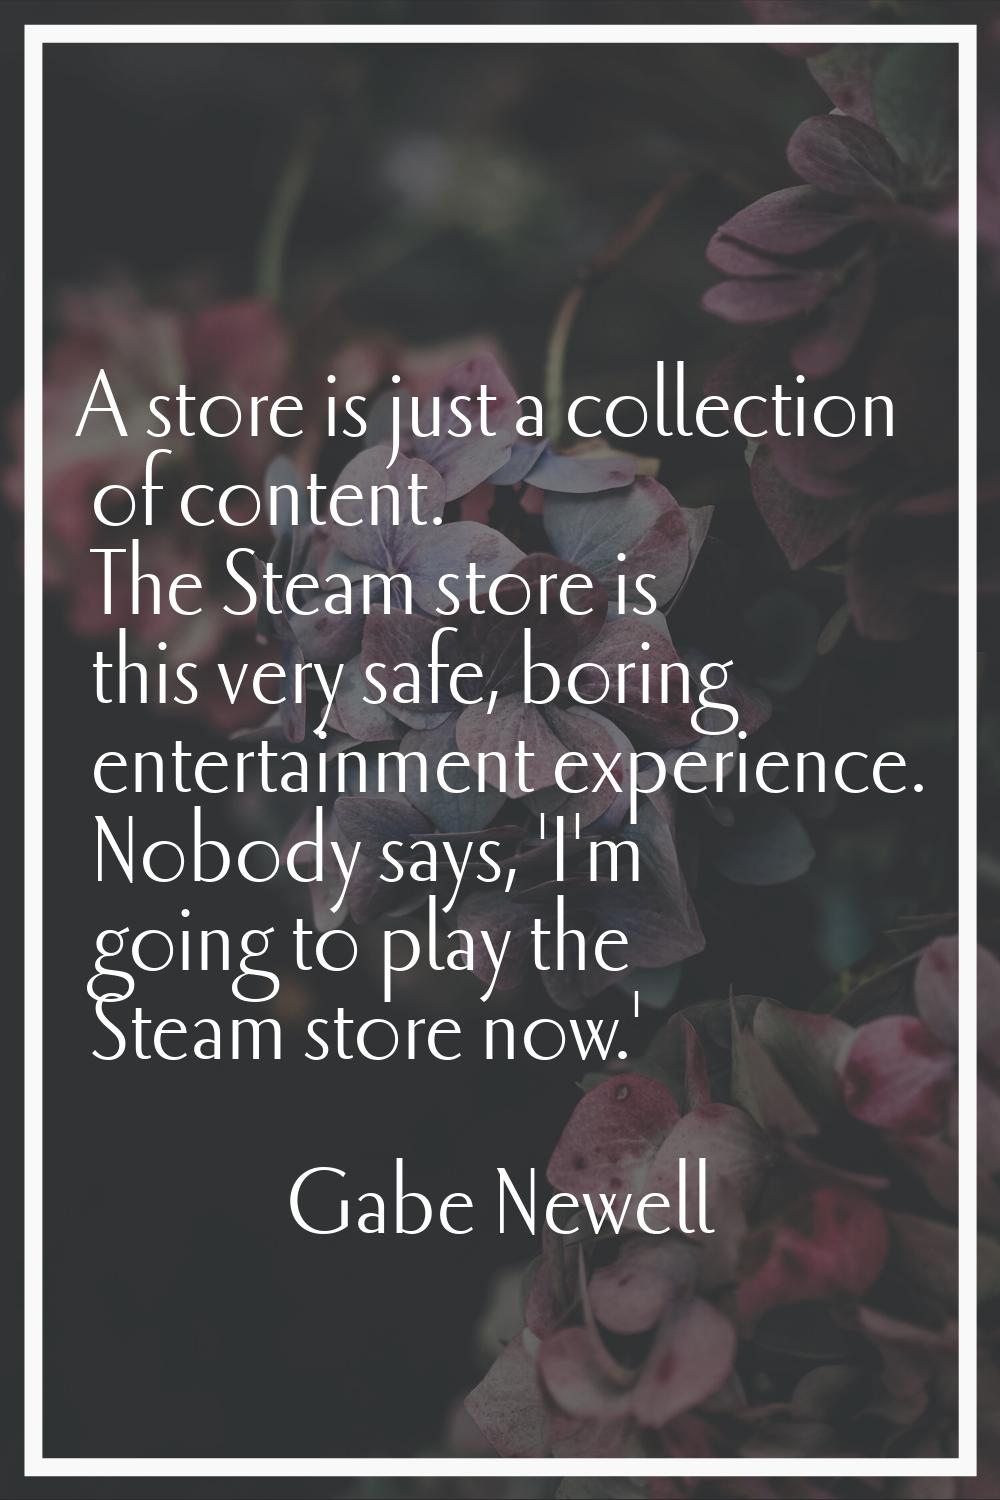 A store is just a collection of content. The Steam store is this very safe, boring entertainment ex